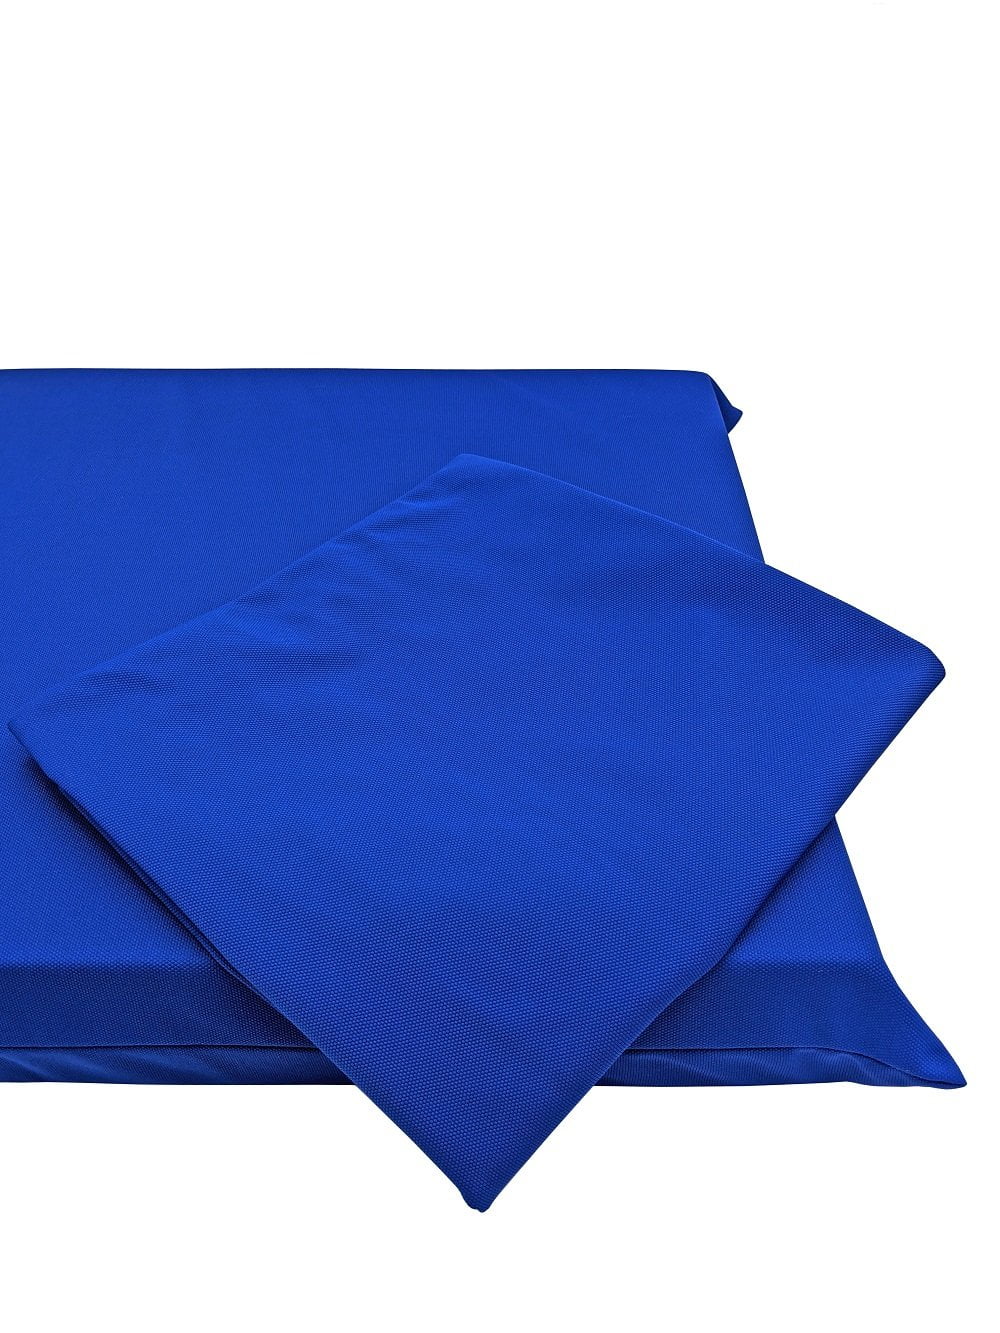 4 Pack Waterproof Royal Blue Elastic 24 X22 Flat Cover For Multiple Sizes Of Patio And Outdoor Indoor Chair Cushions Com - Royal Blue Patio Chair Pads